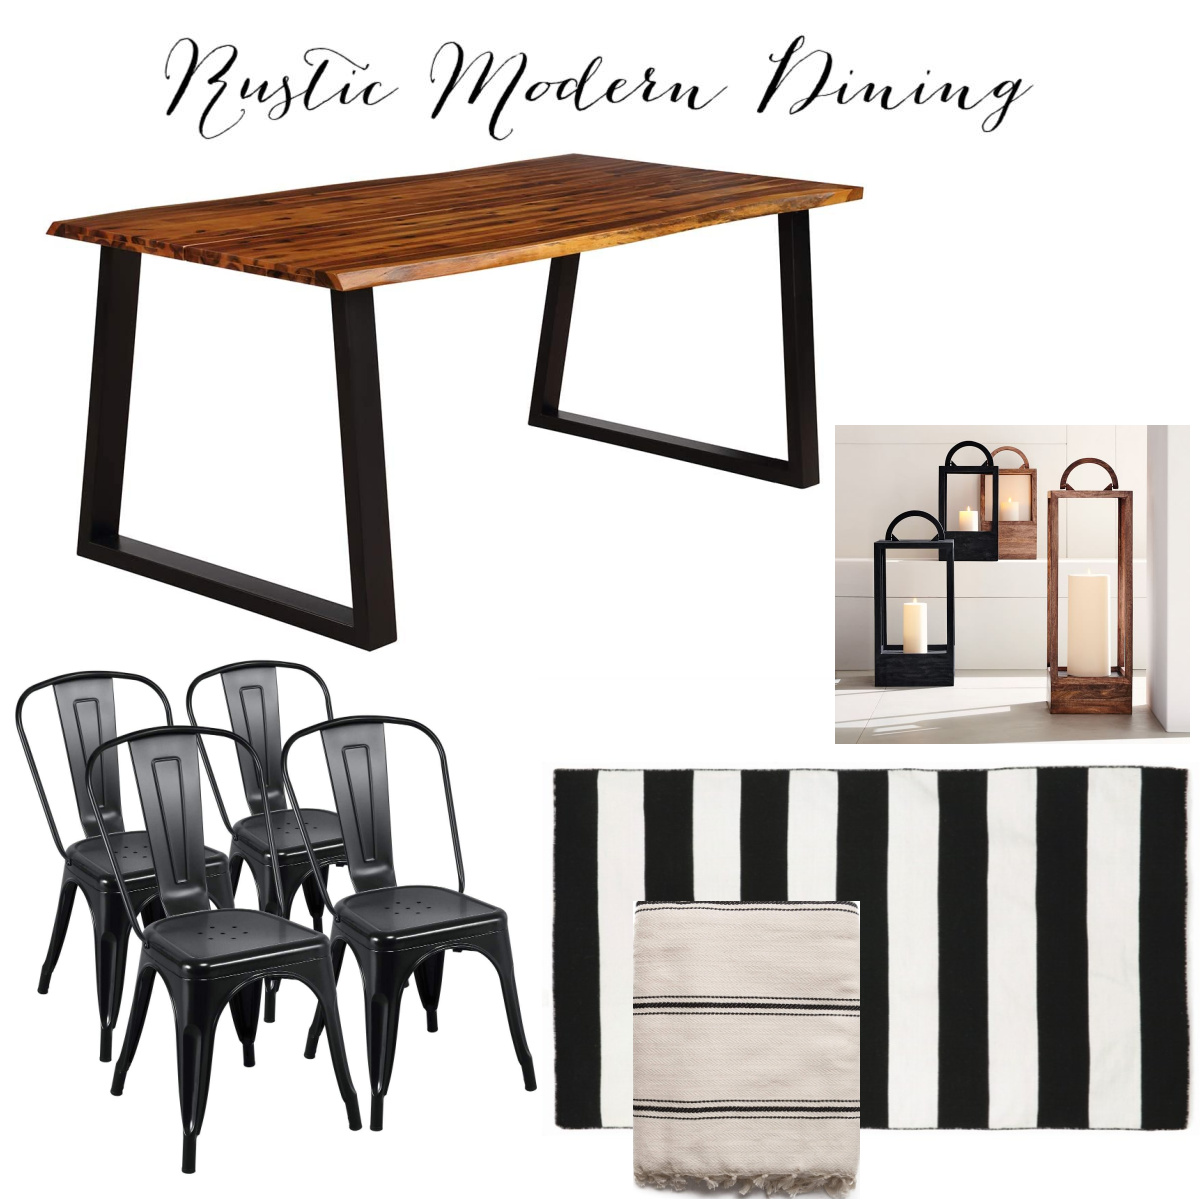 Modern Rustic Patio Dining mood board with black and neutral finishes on Hello Lovely Studio. #patiofurniture #patiodining #patioideas #outdoordining